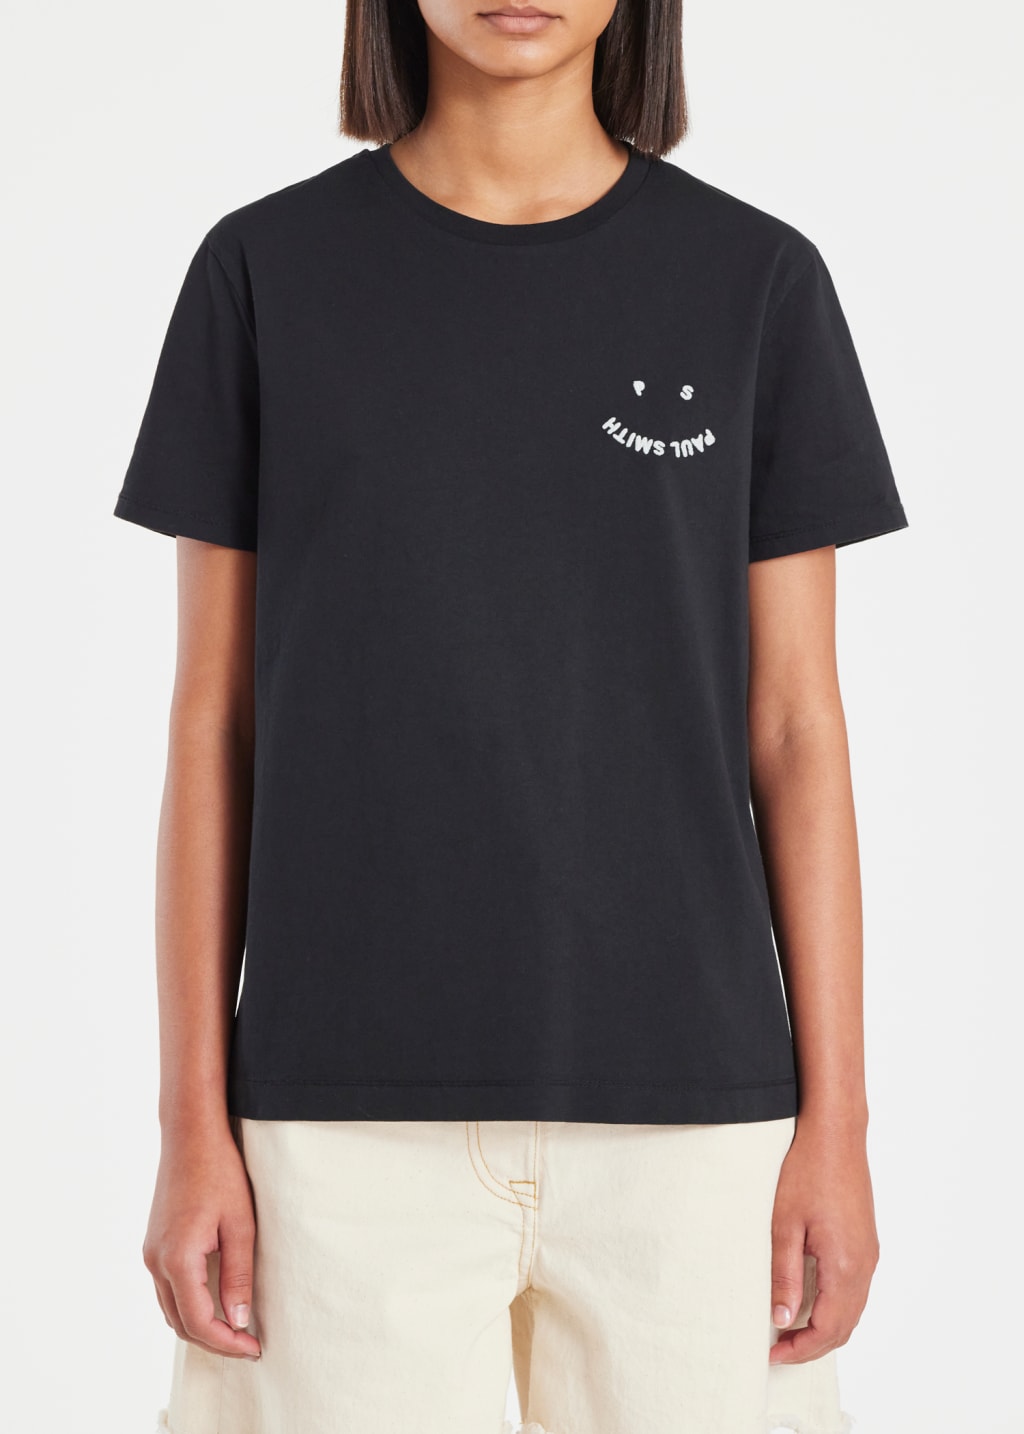 Model View - Women's Black Embroidered 'Happy' Logo T-Shirt by Paul Smith